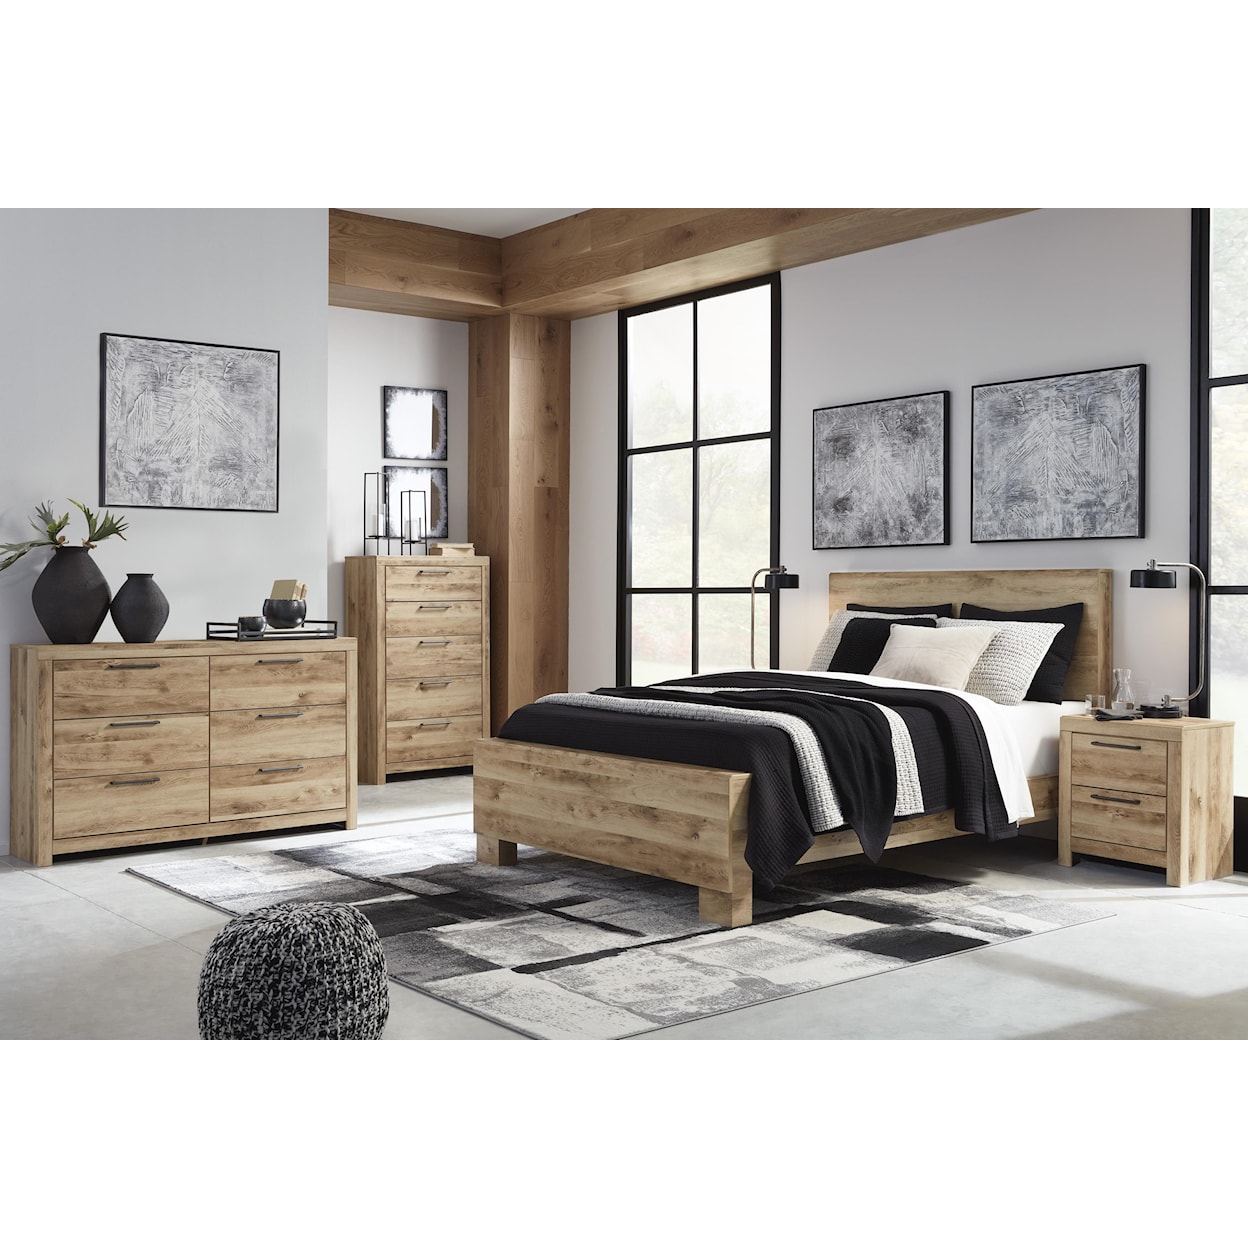 Signature Design by Ashley Hyanna 5 Piece King Panel Bedroom Set